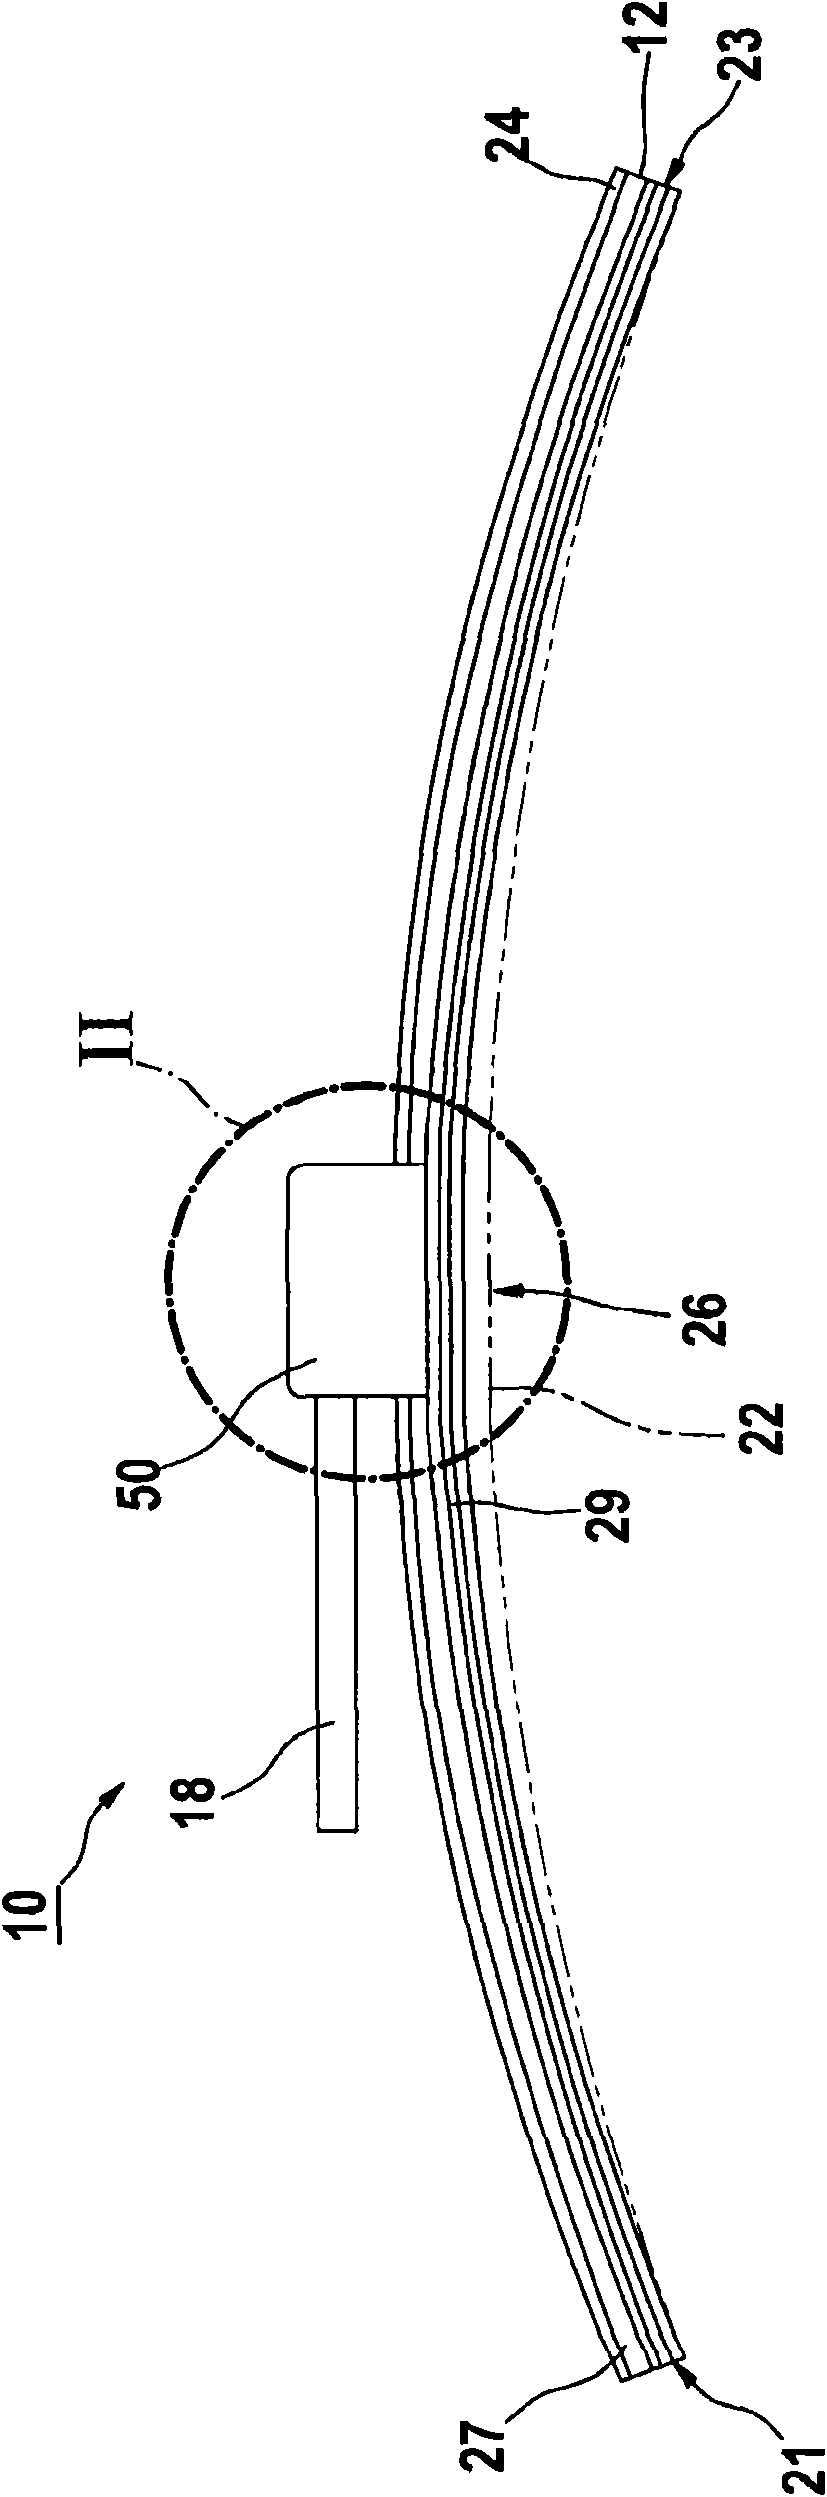 Wiper blade provided with transferring unit used for fixing on wiper arm